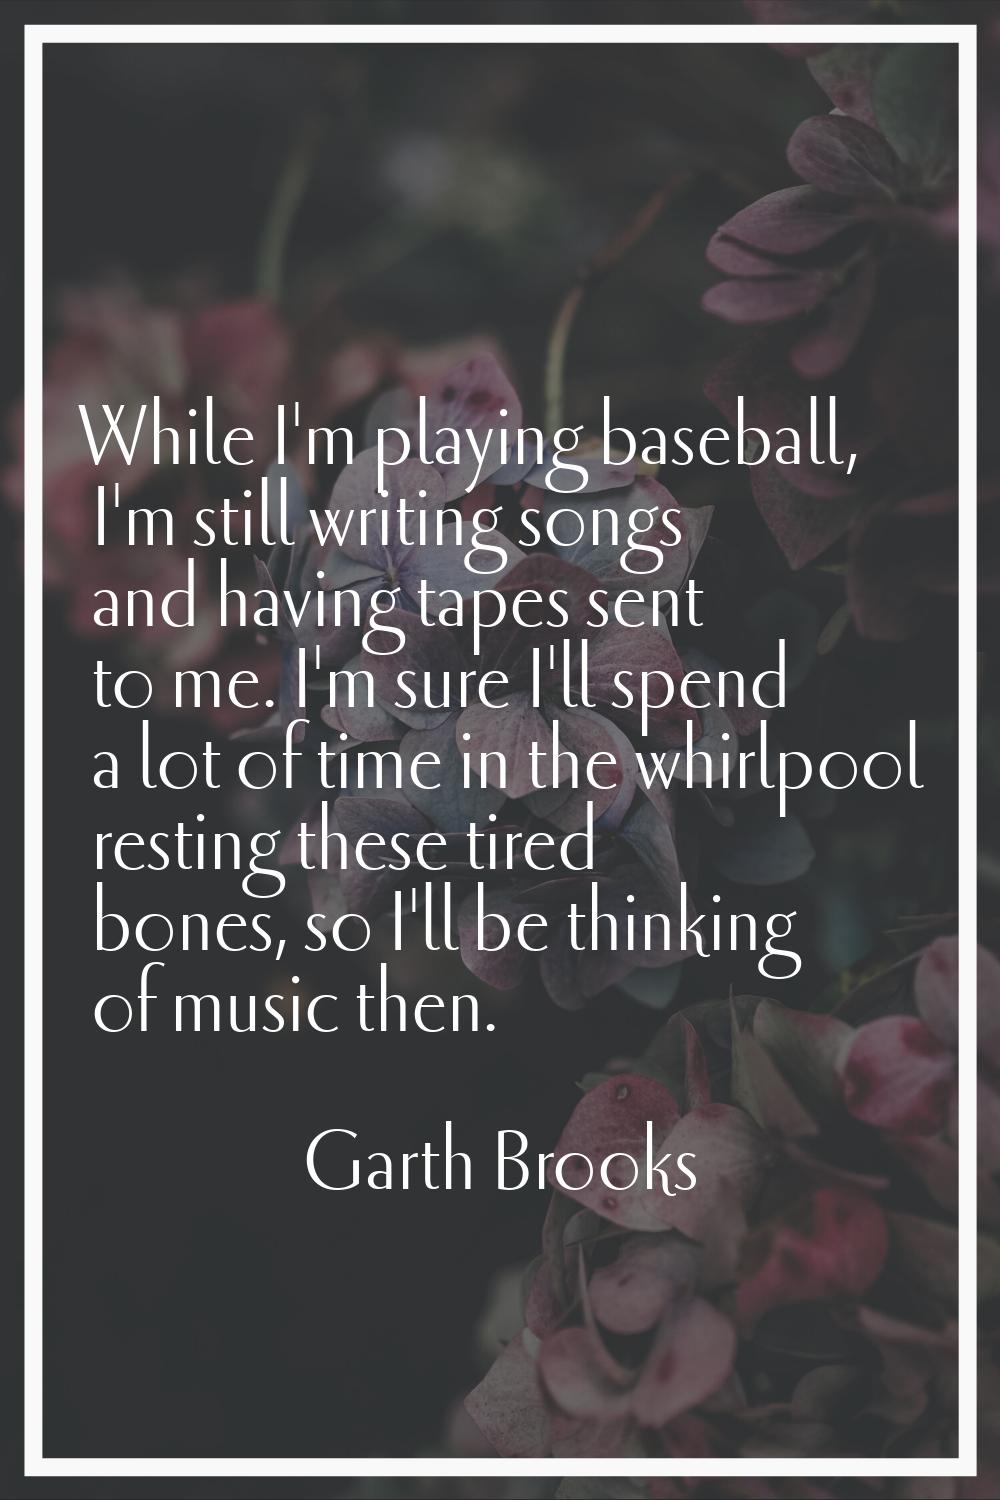 While I'm playing baseball, I'm still writing songs and having tapes sent to me. I'm sure I'll spen